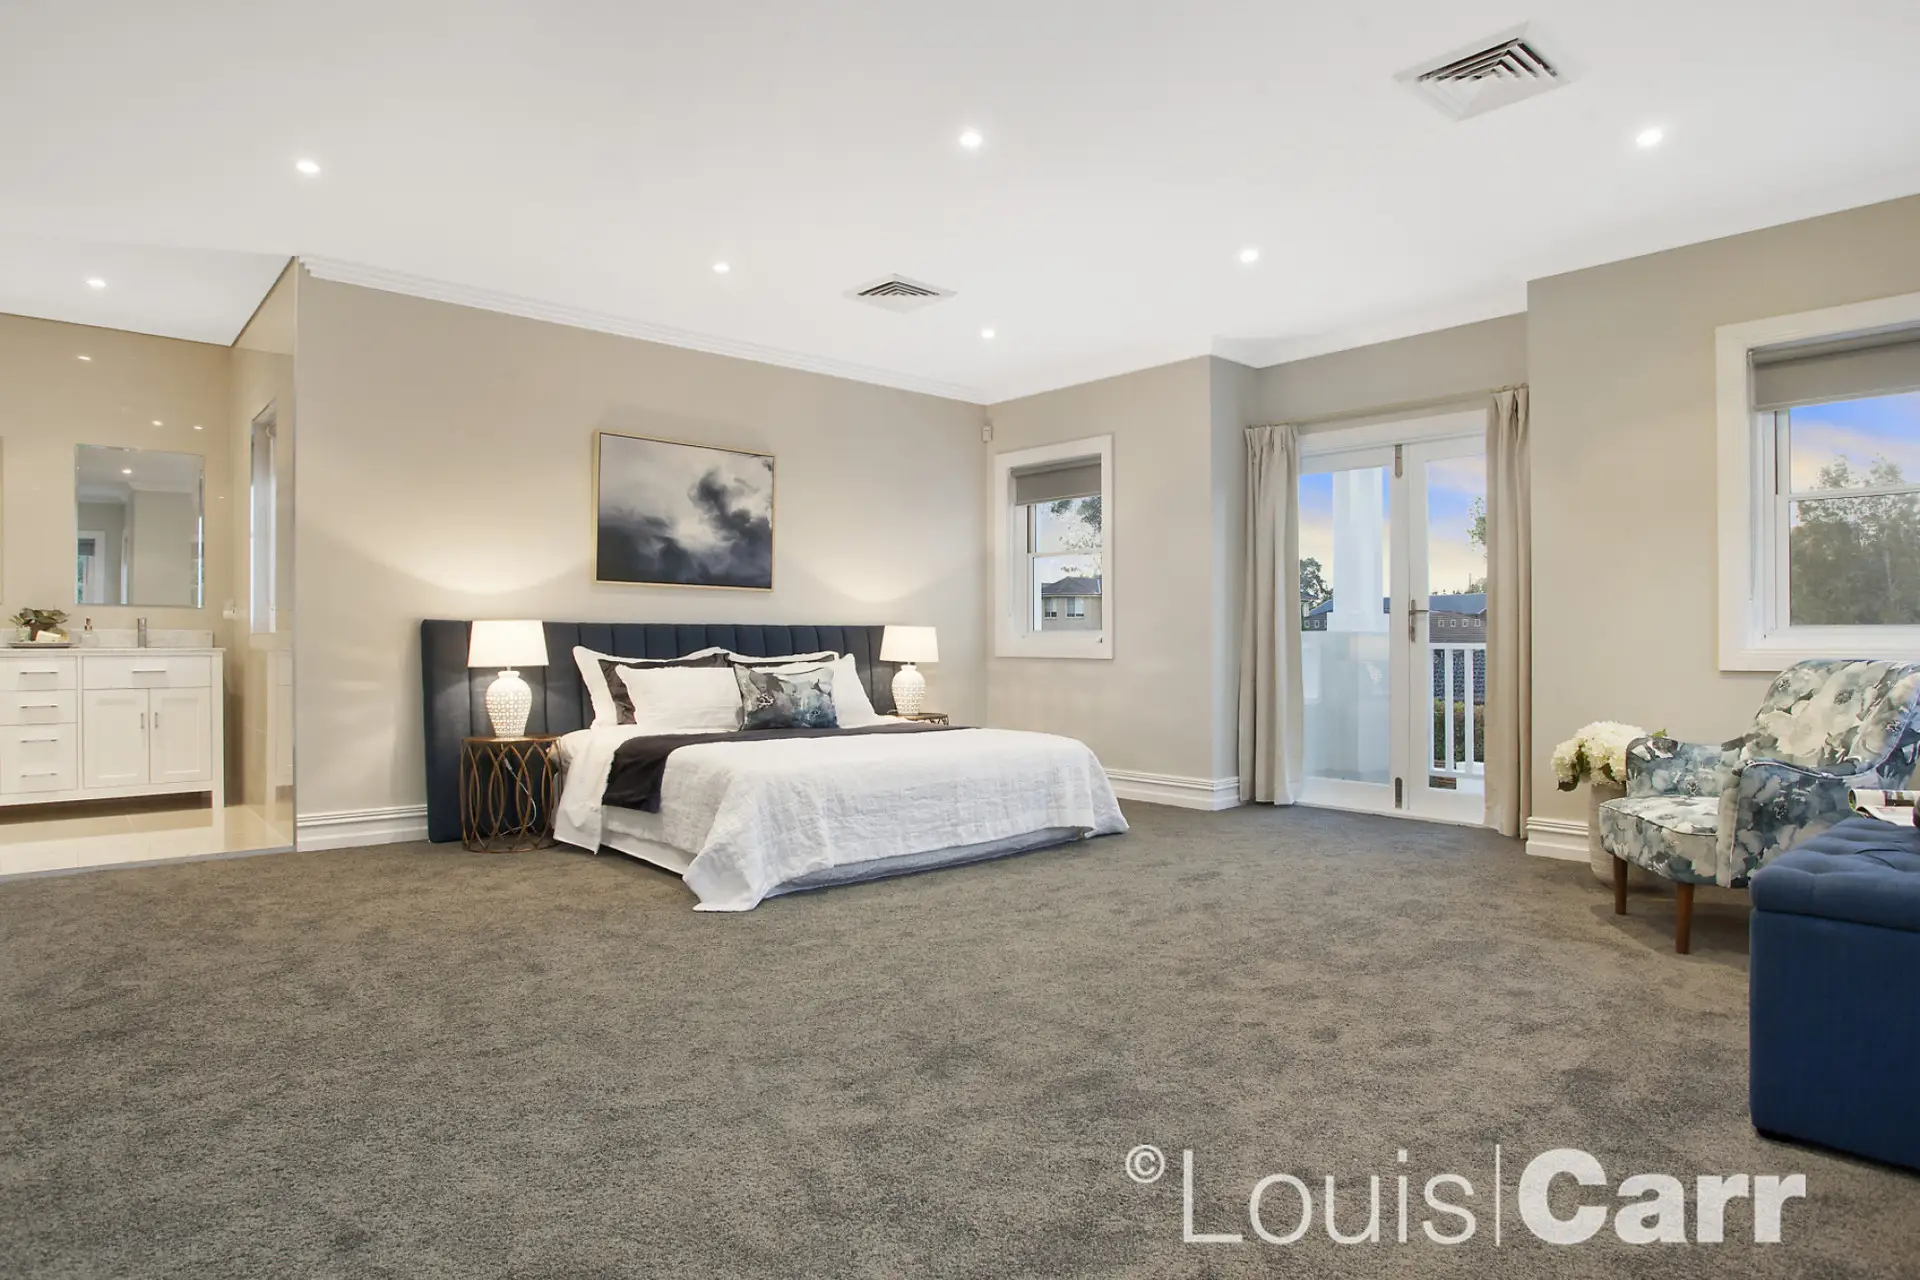 Photo #8: 489a Galston Road, Dural - Sold by Louis Carr Real Estate